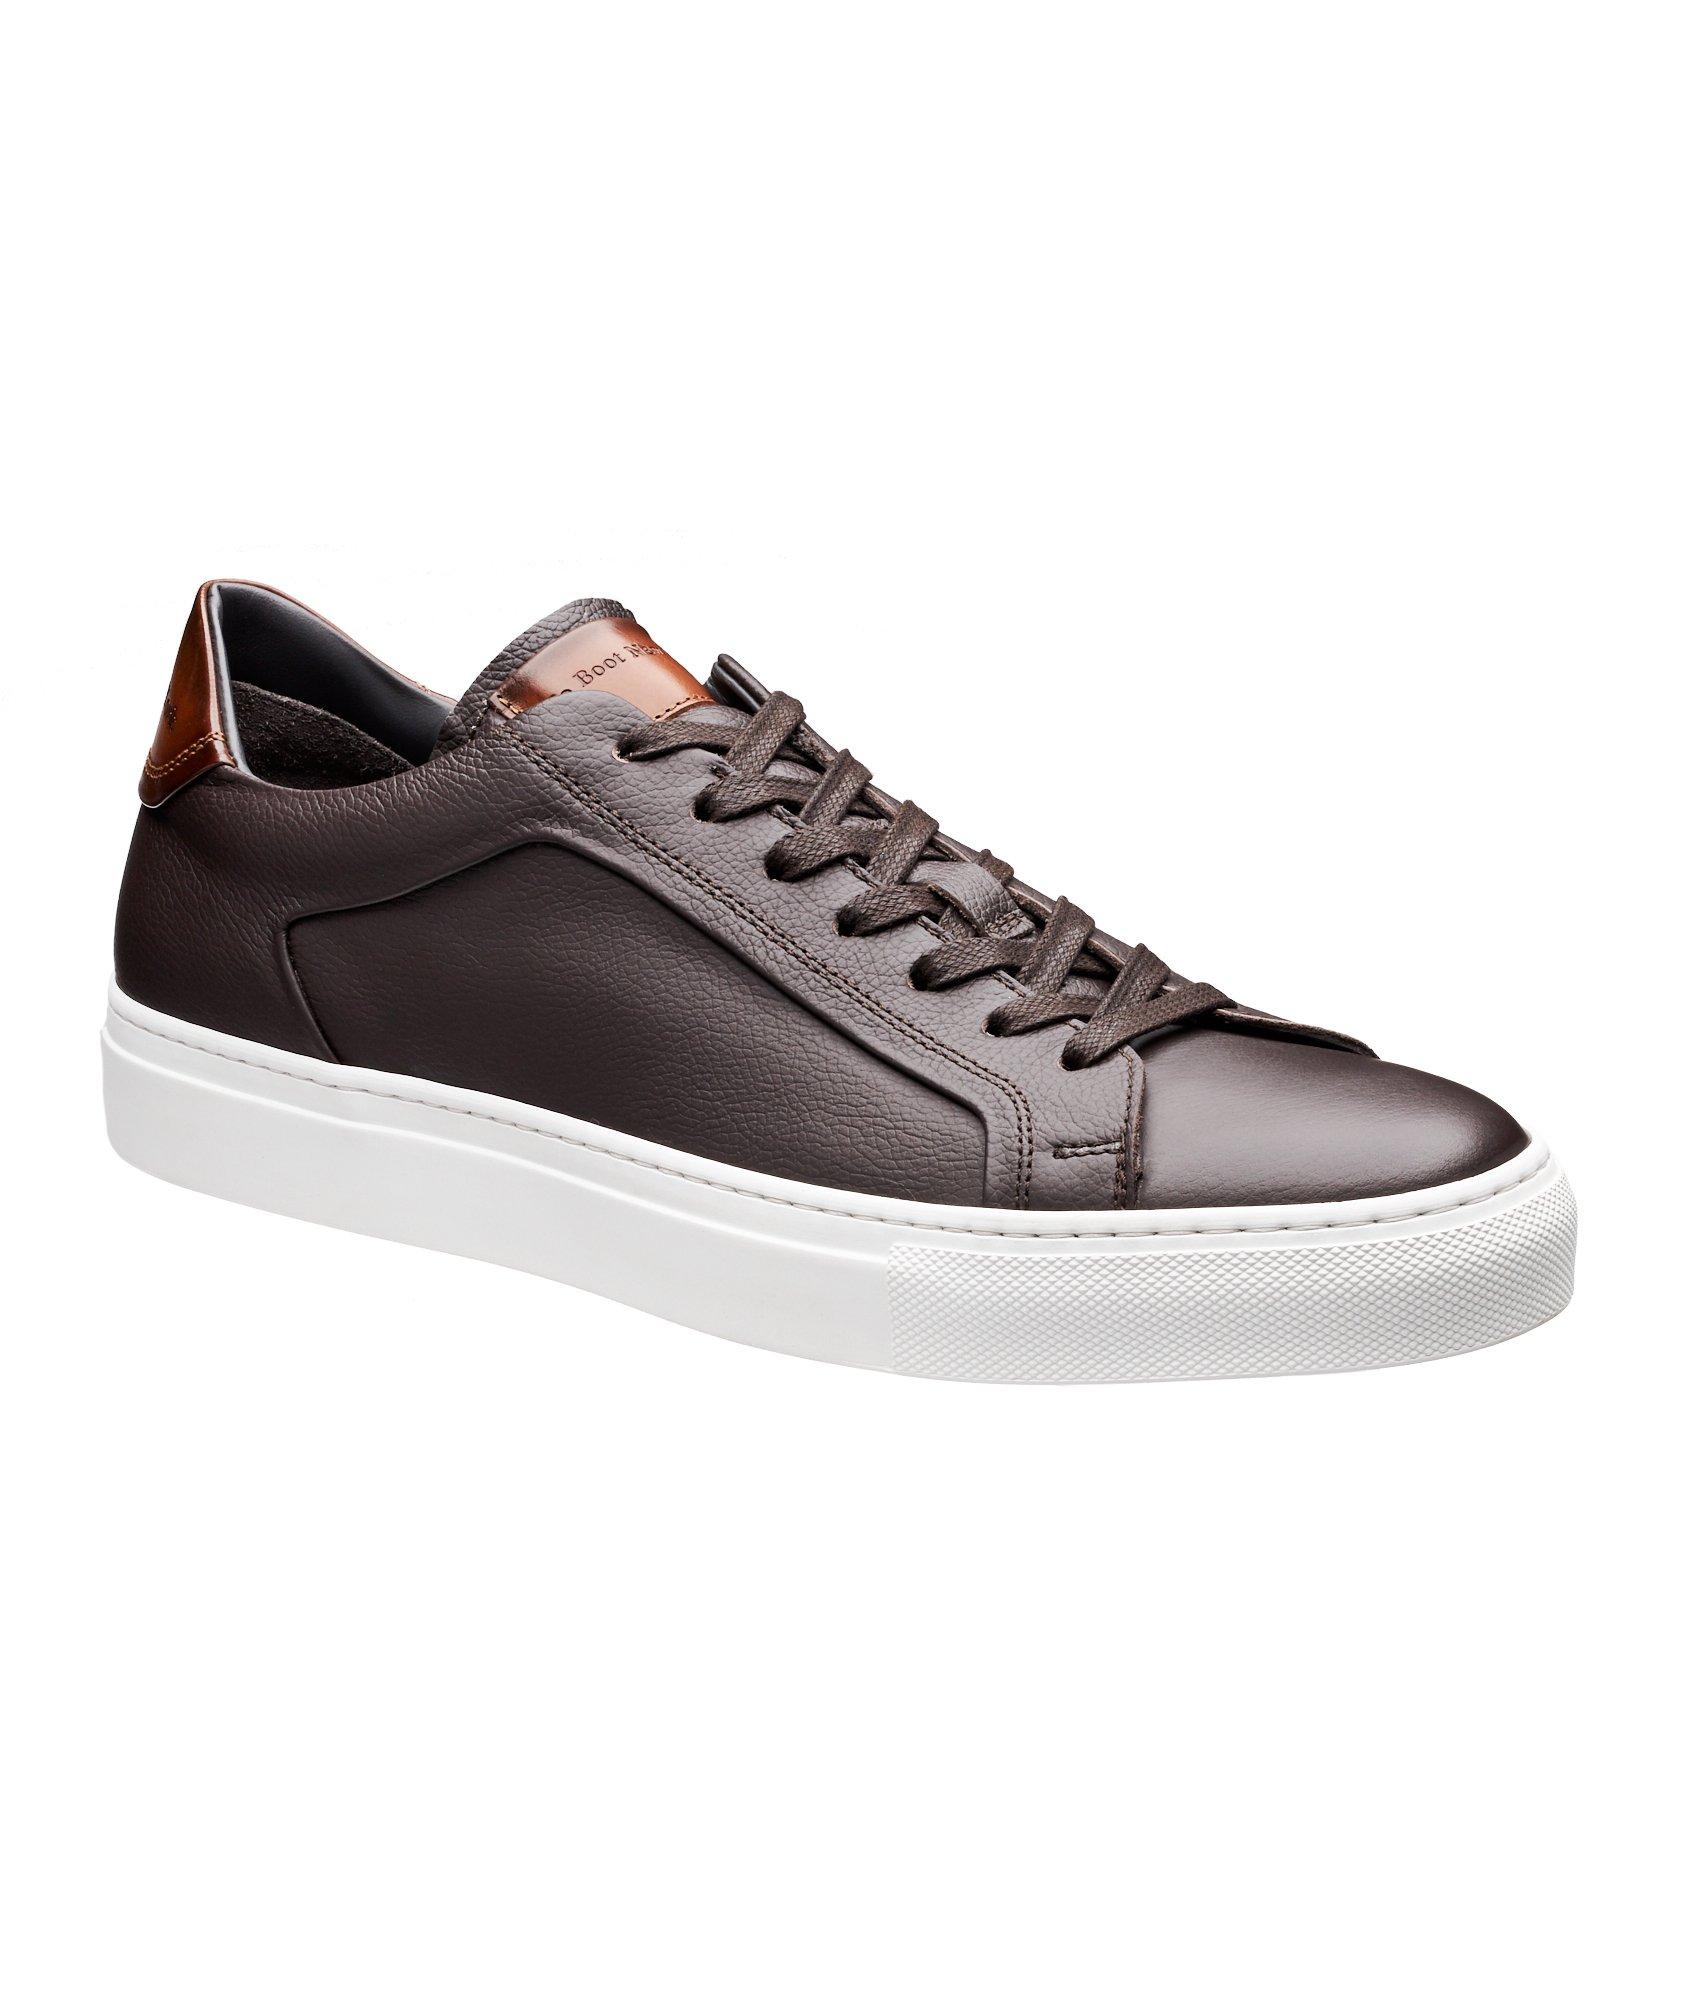 Soft Tumbled Leather Low-Tops image 0